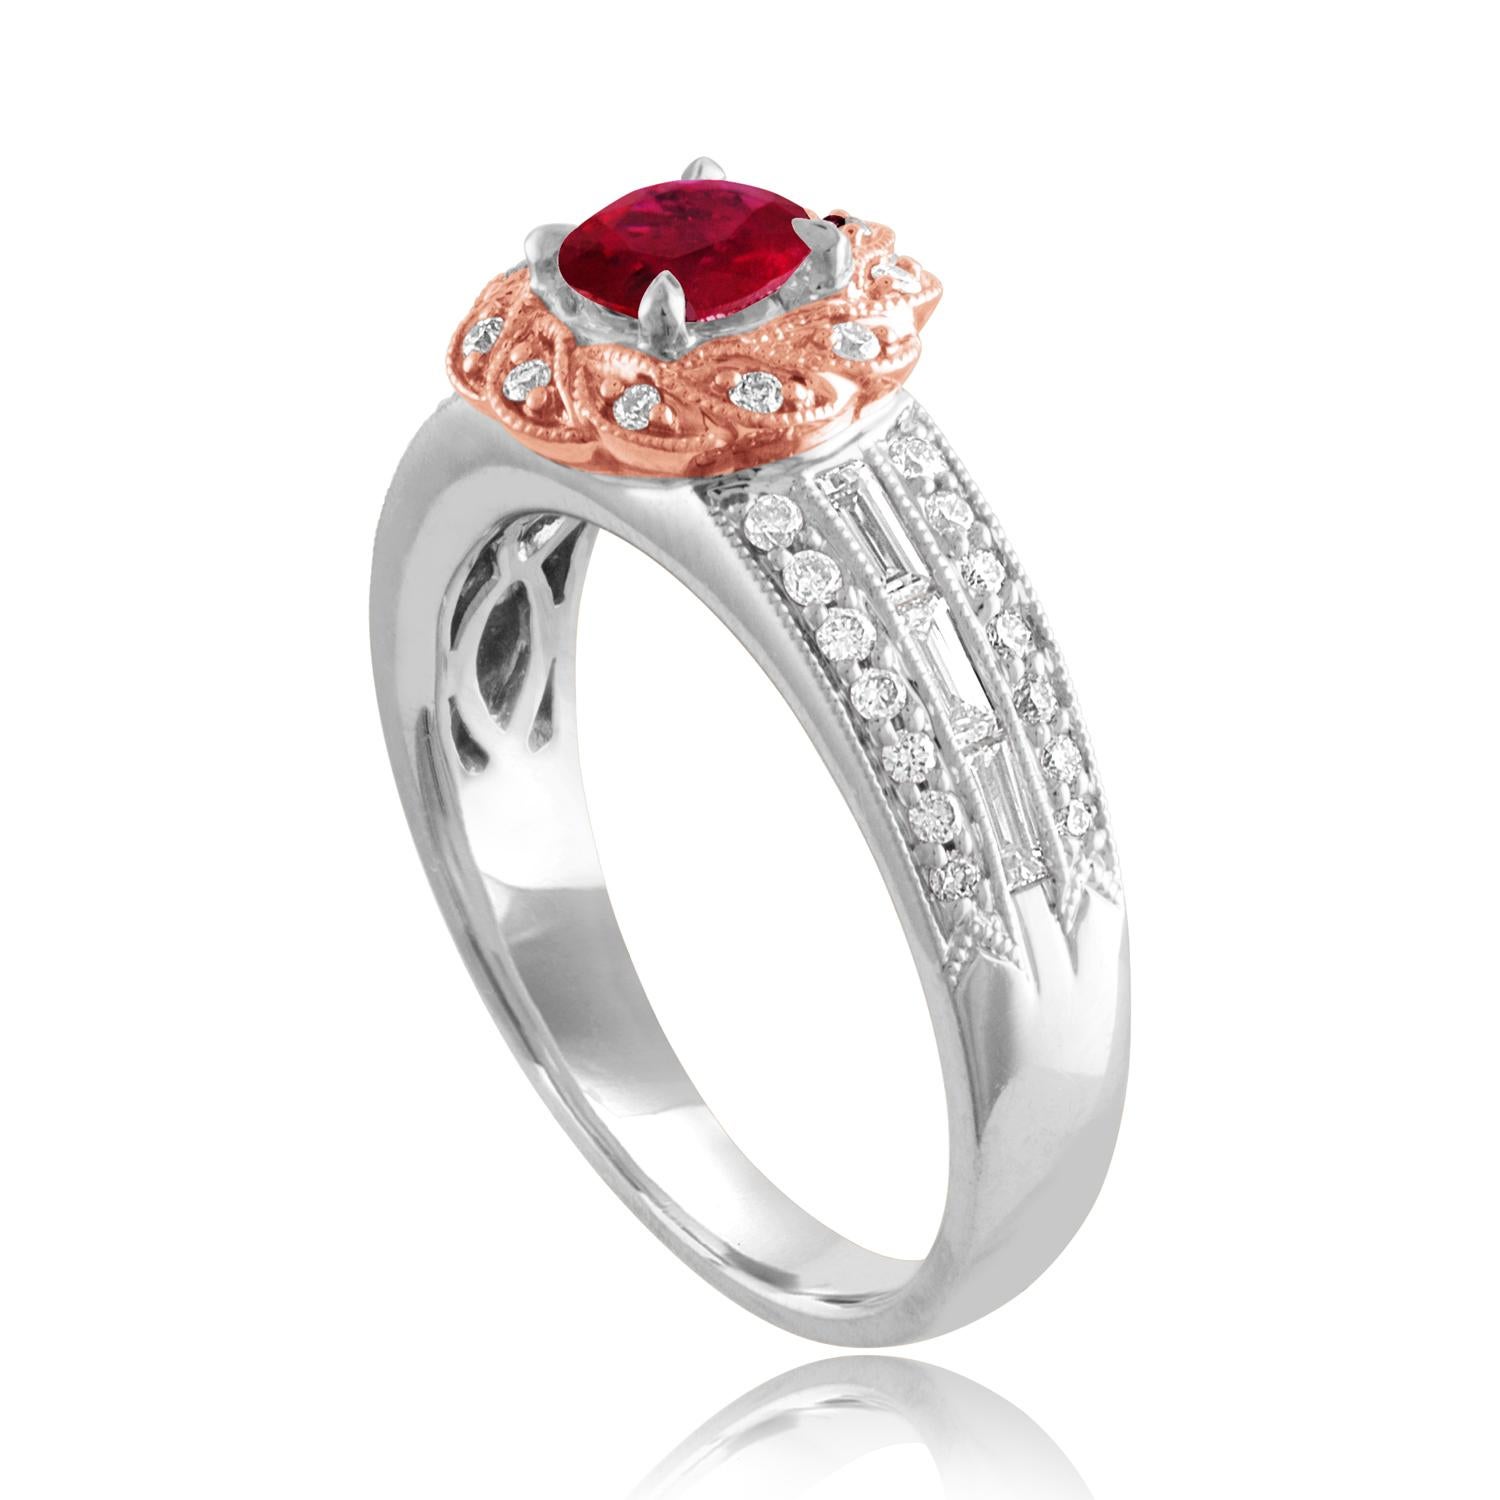 Beautiful Round Halo Two Tone Milgrain Ring
The ring is 18K White & Rose Gold
The Center Stone is a Round Ruby 0.86 Carats
The Ruby is AGL Certified Heated
There are 0.53 Carats in Diamonds F/G VS/SI
The ring is a size 6.75, sizable.
The ring weighs